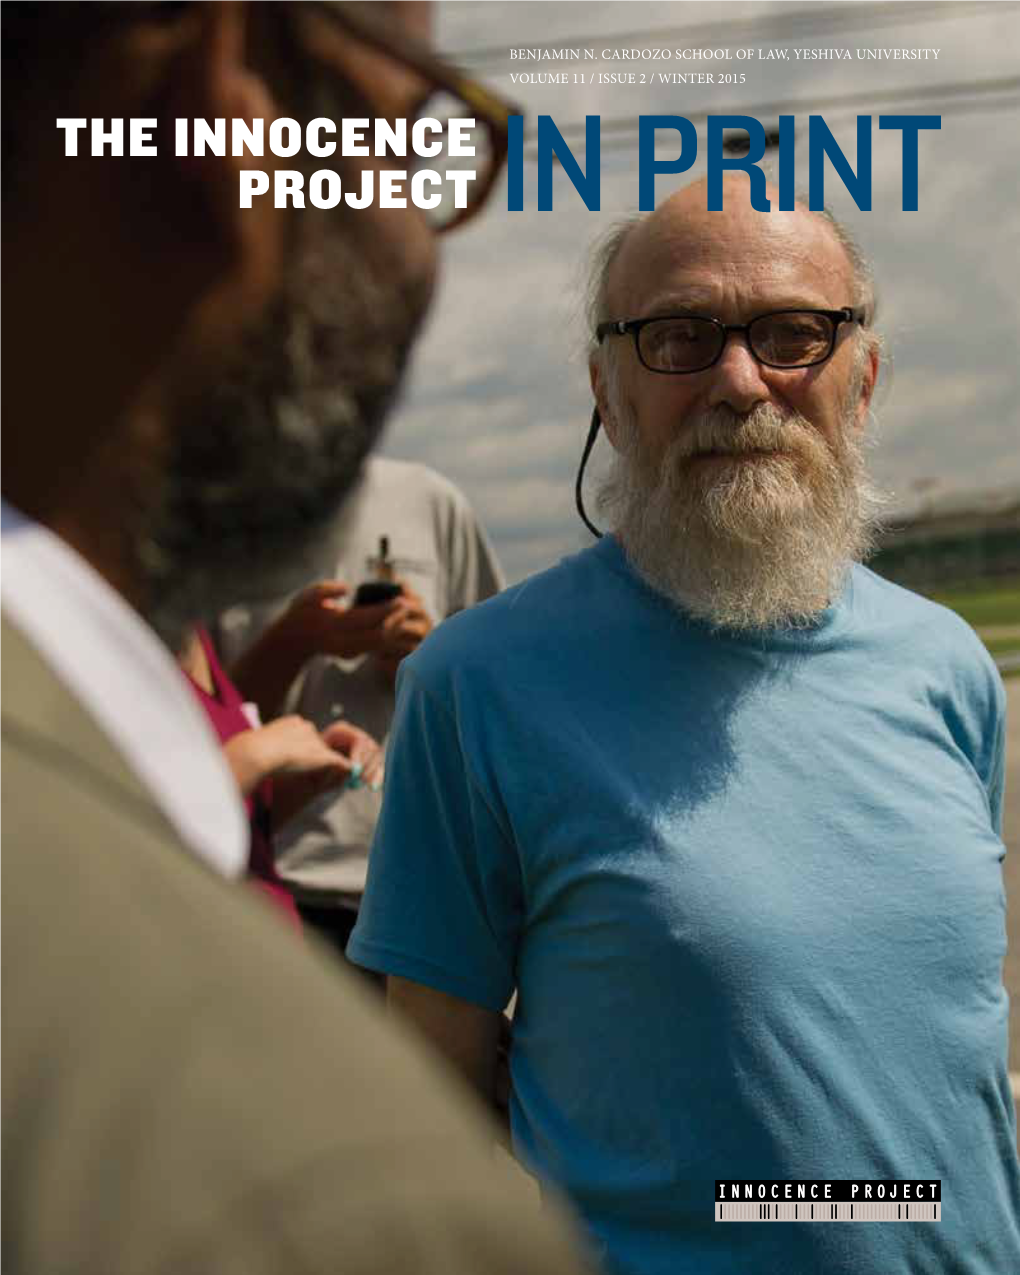 The Innocence Project in PRINT the 10 18 Trials Home of for Lewis the Fogle Holidays